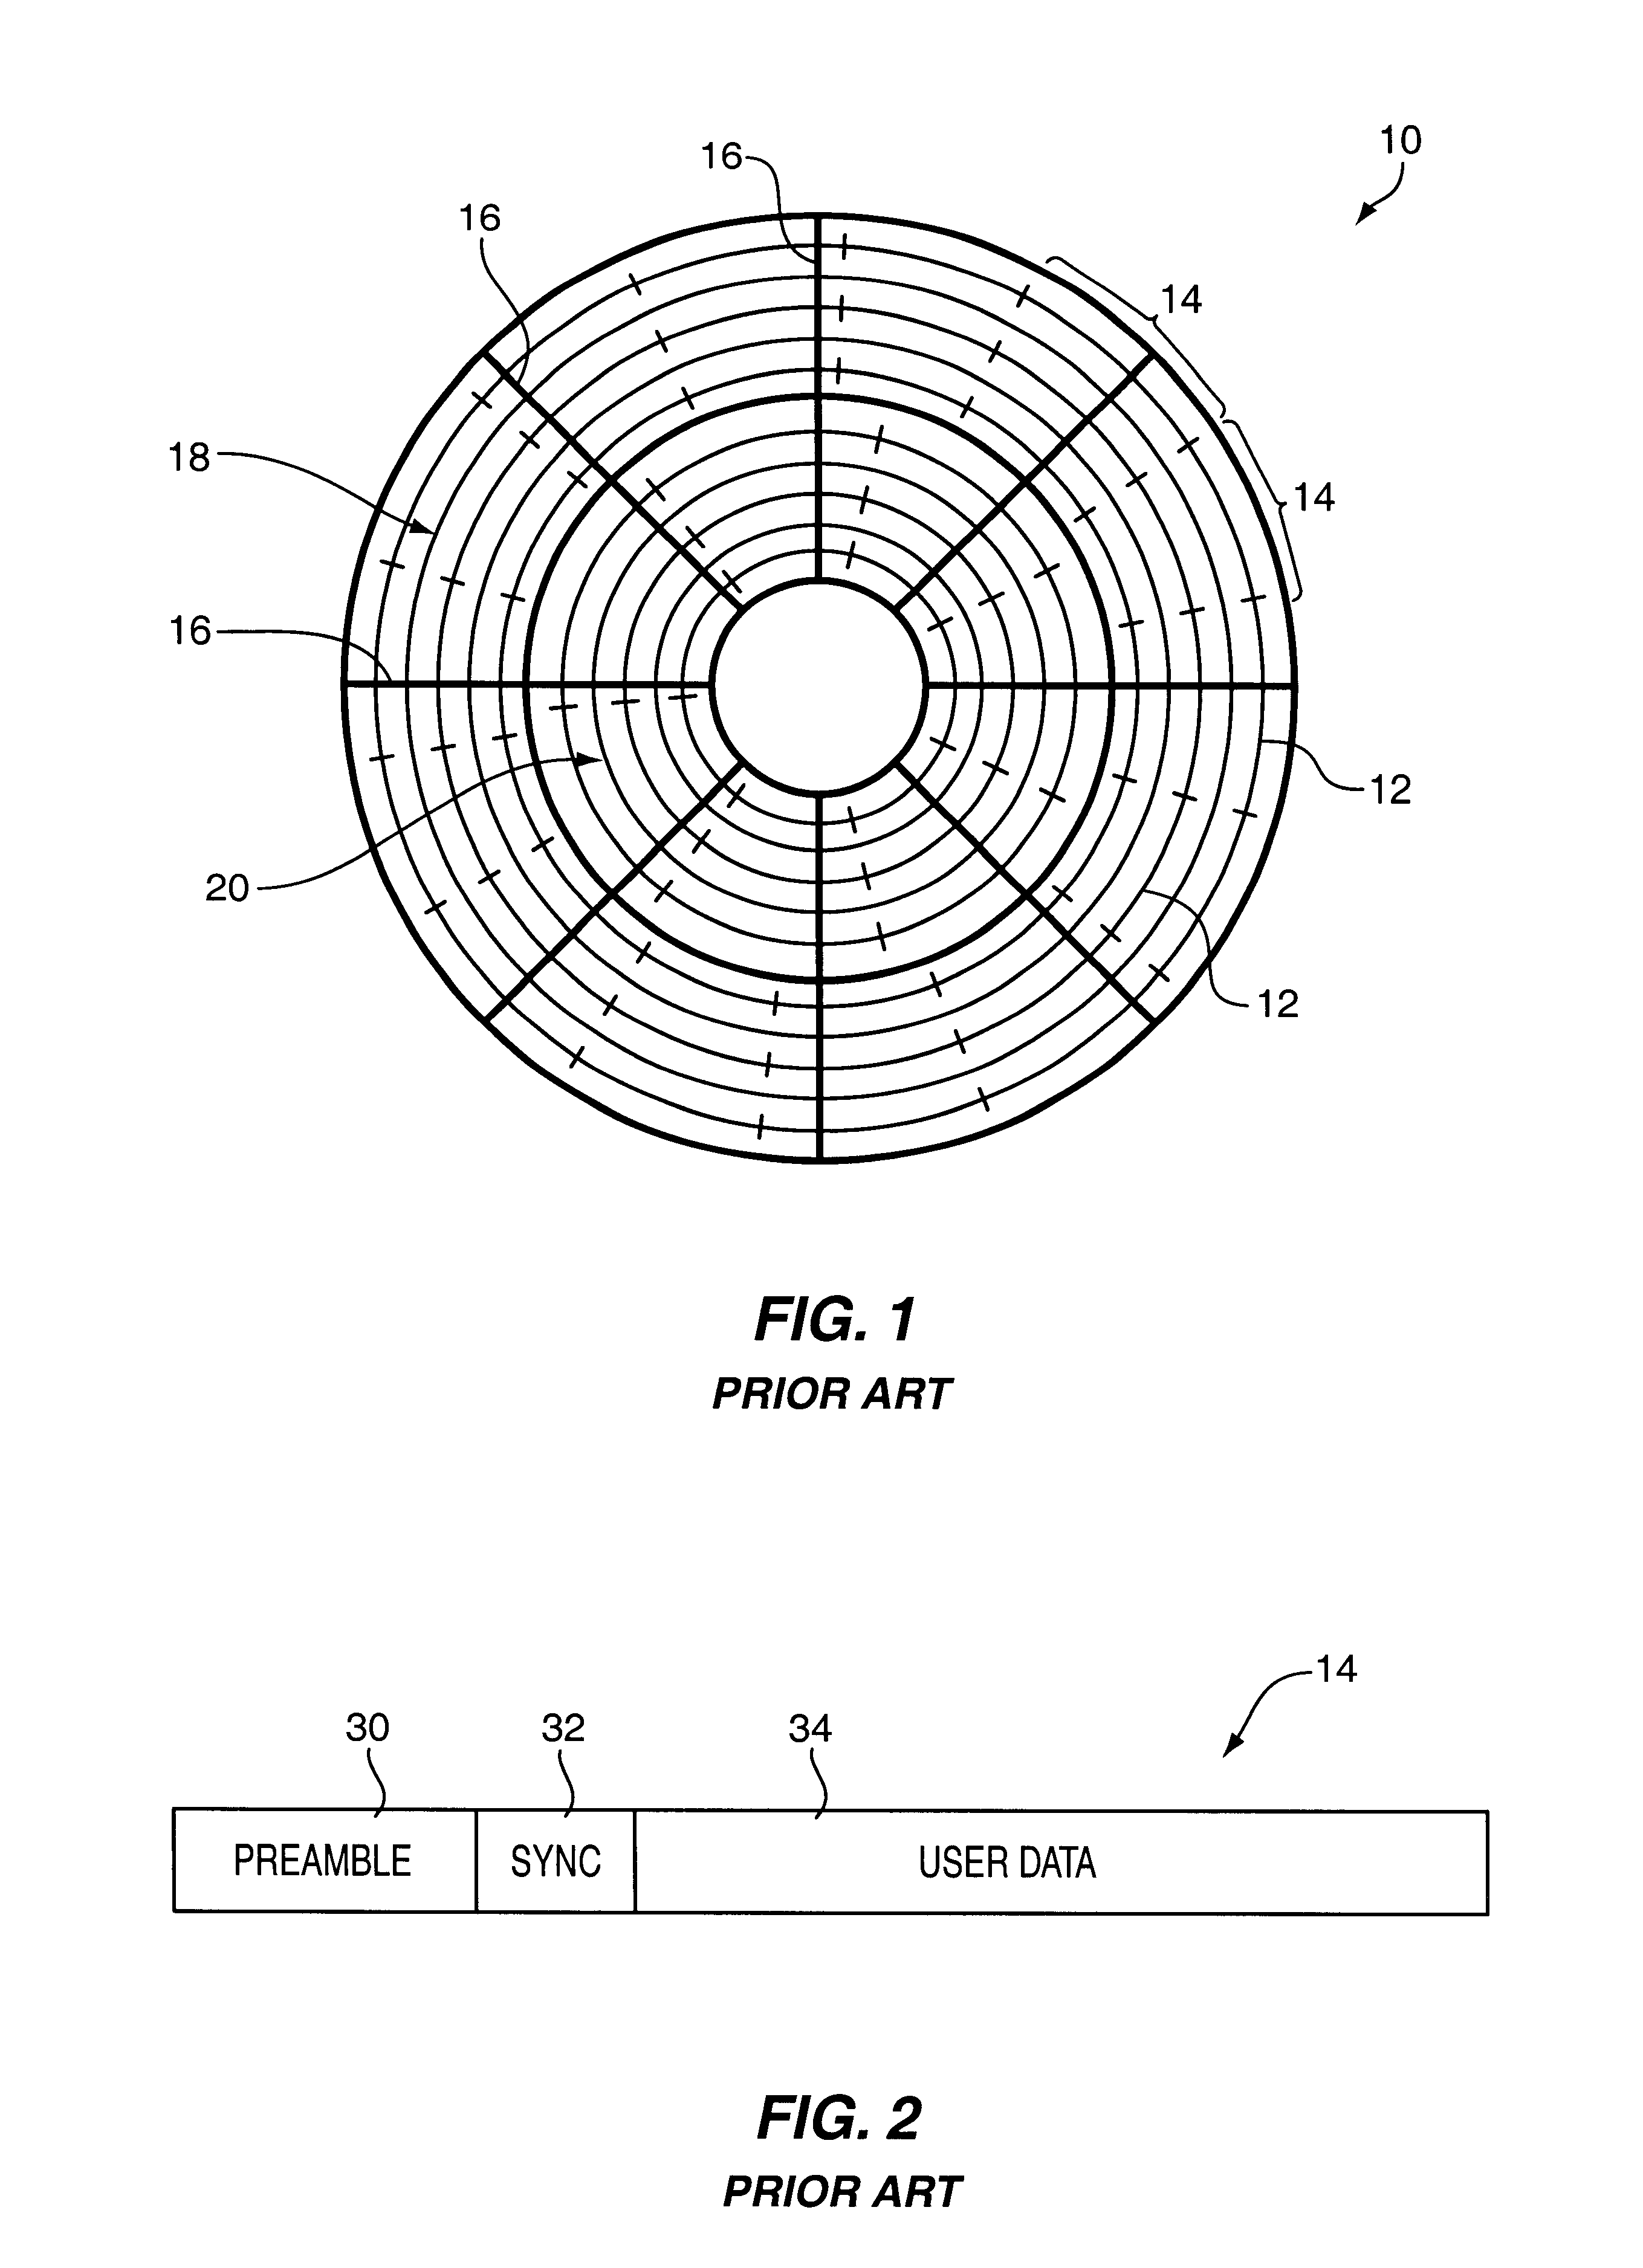 Viterbi detector with partial erasure compensation for read channels